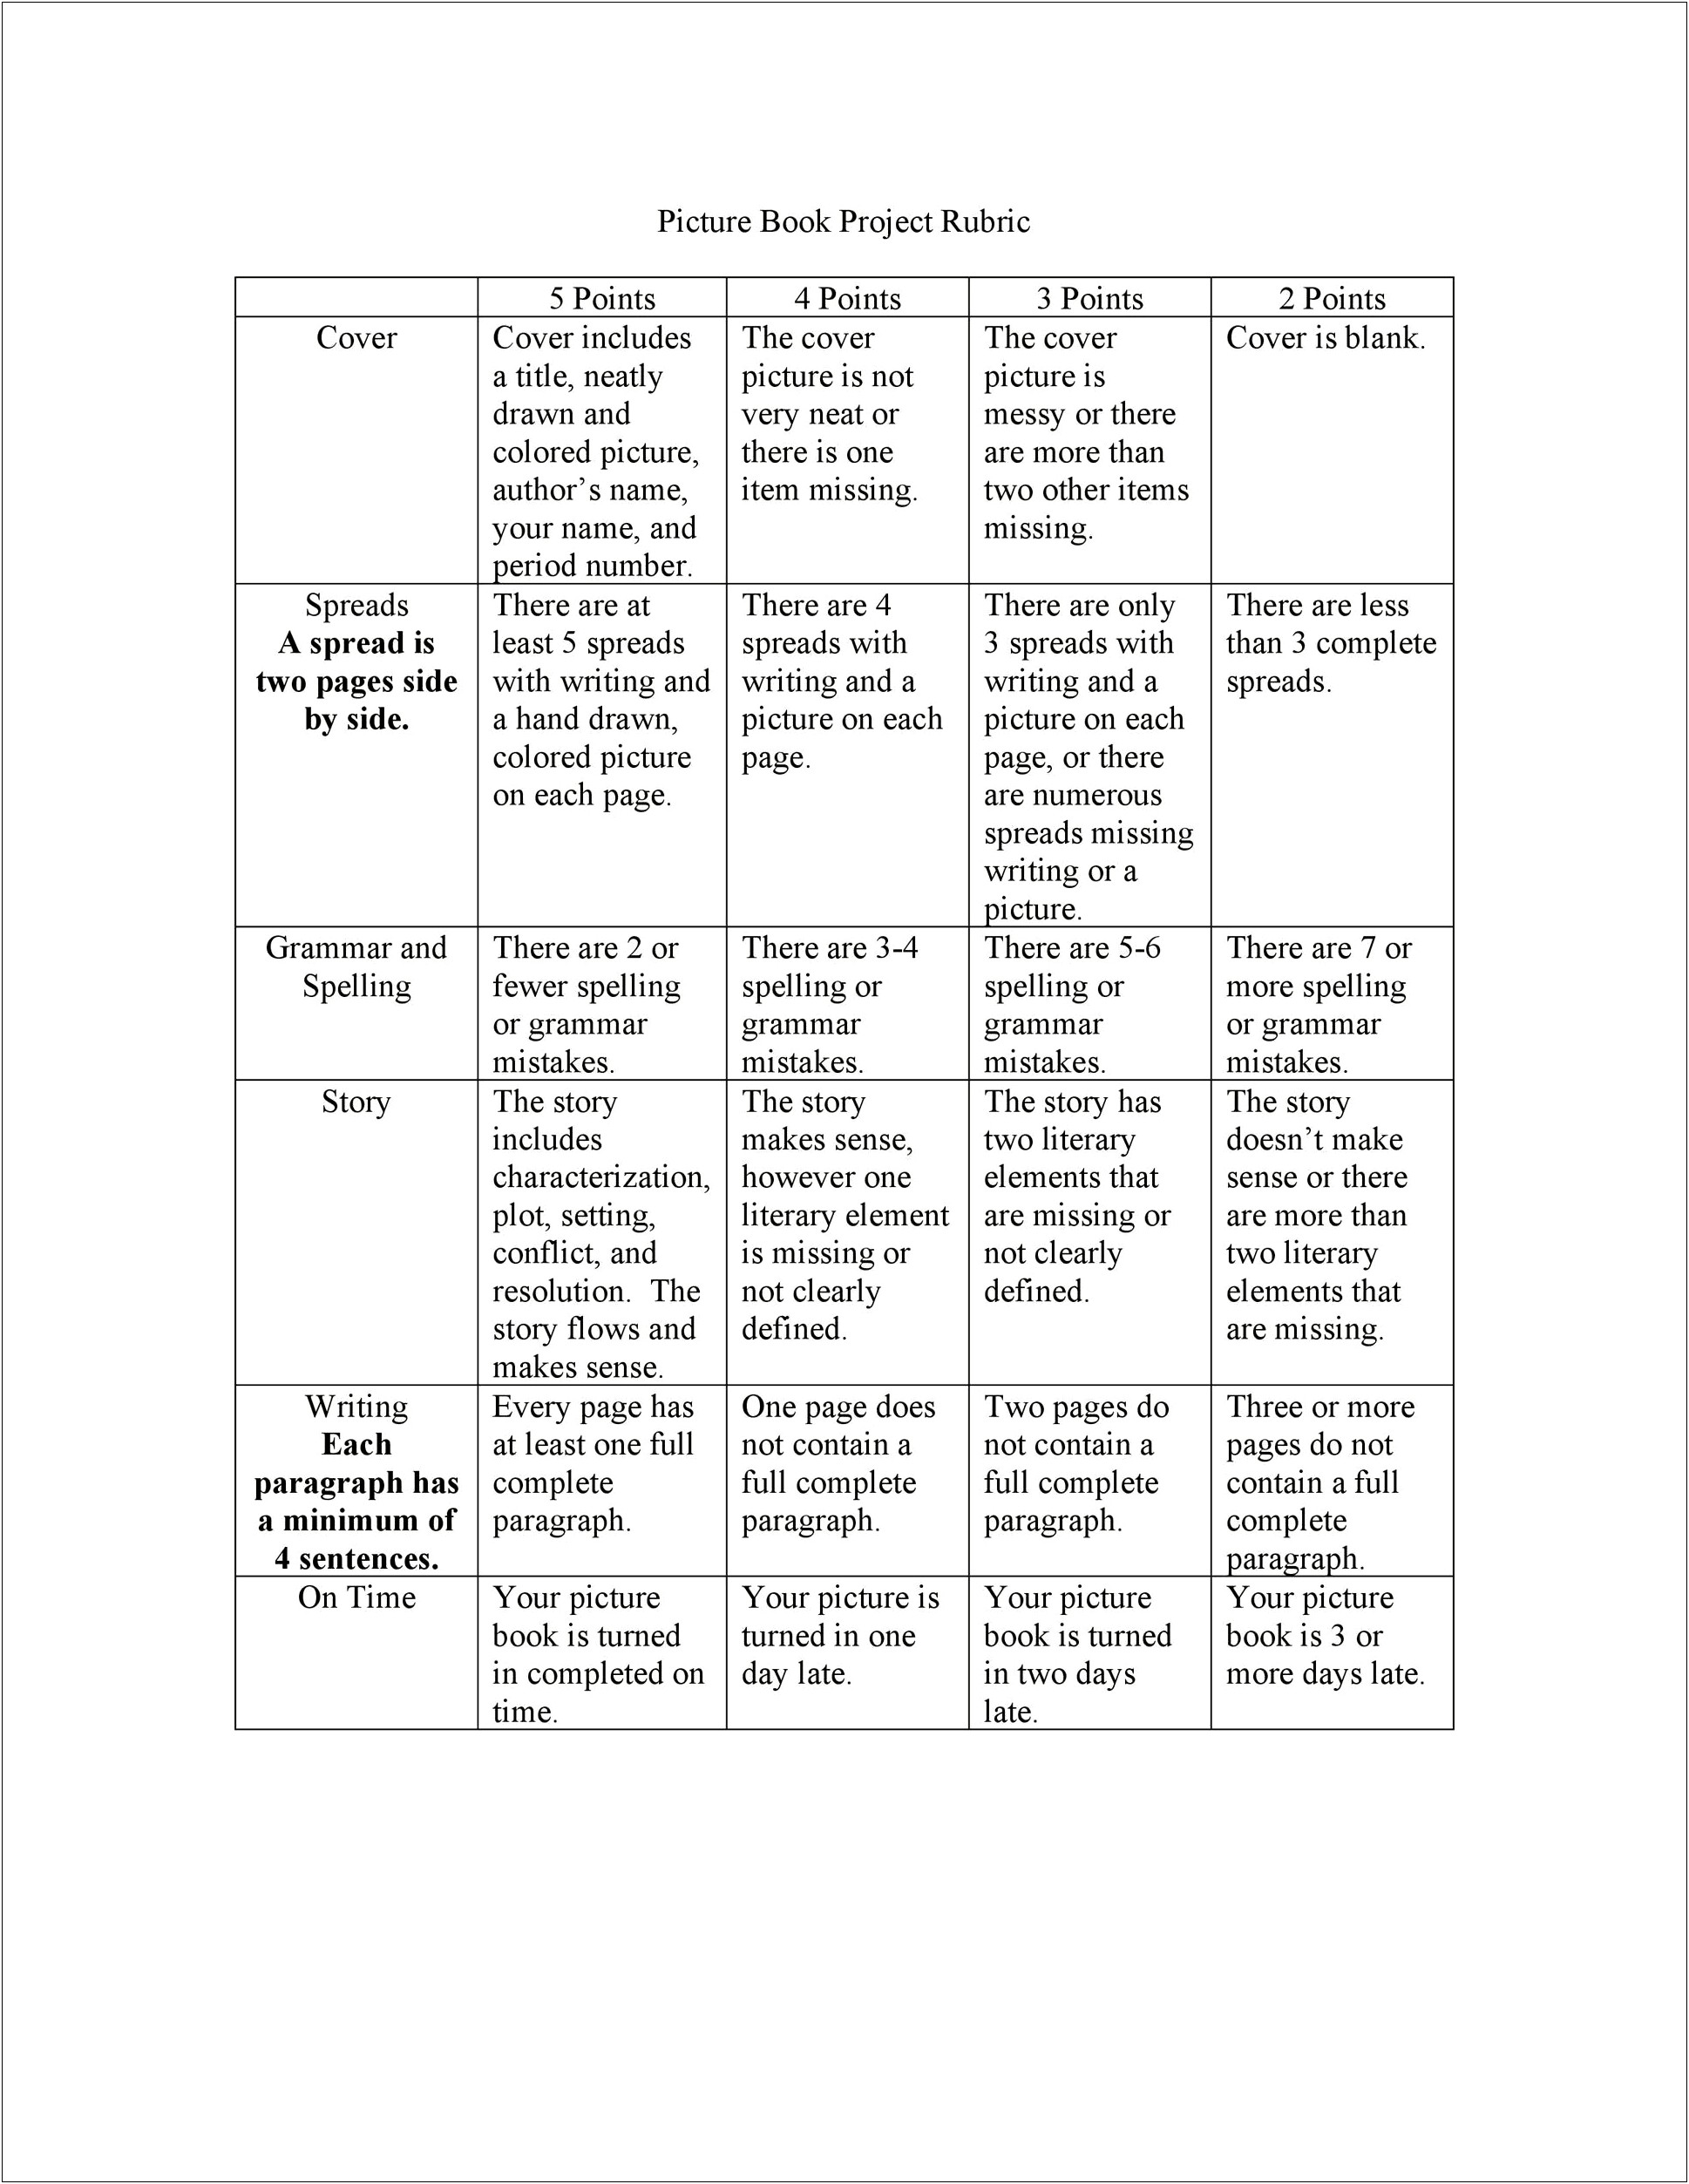 Resume And Cover Letter Assignment Rubric